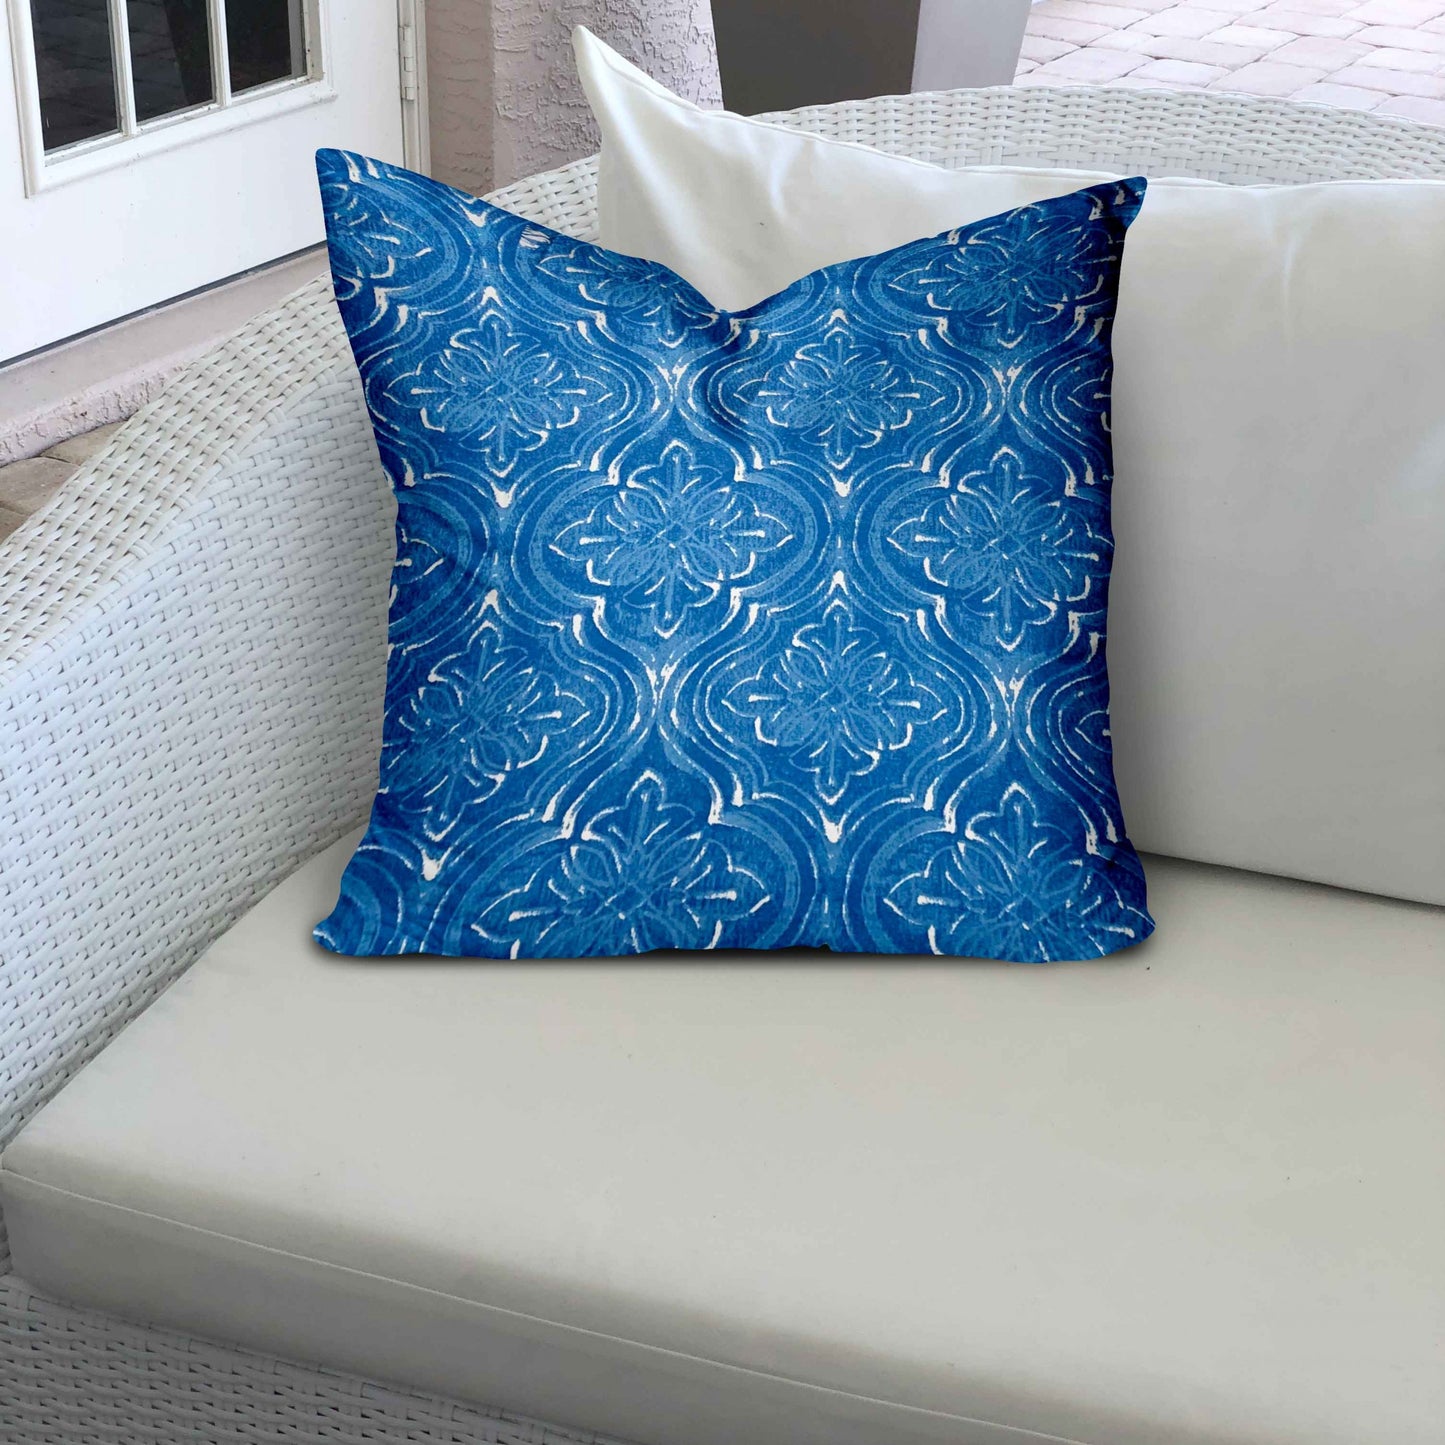 24" X 24" Blue And White Enveloped Ikat Throw Indoor Outdoor Pillow